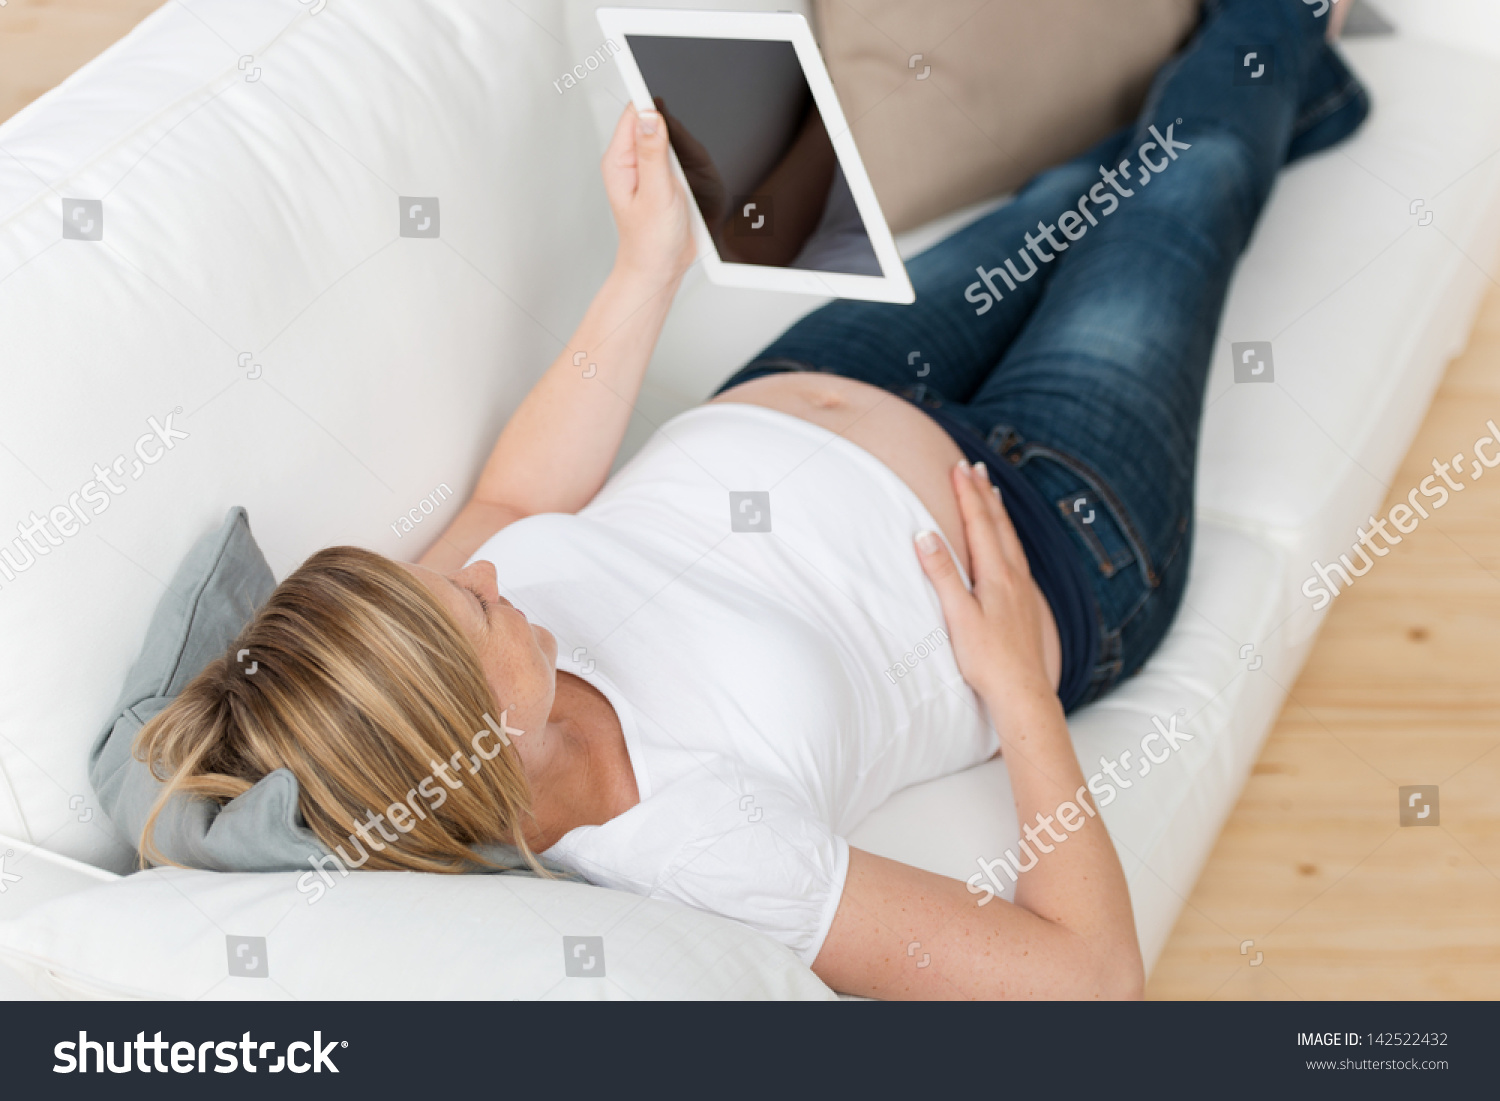 stock-photo-young-pregnant-woman-reading-ebook-on-digital-tablet-while-lying-on-sofa-at-home-142522432